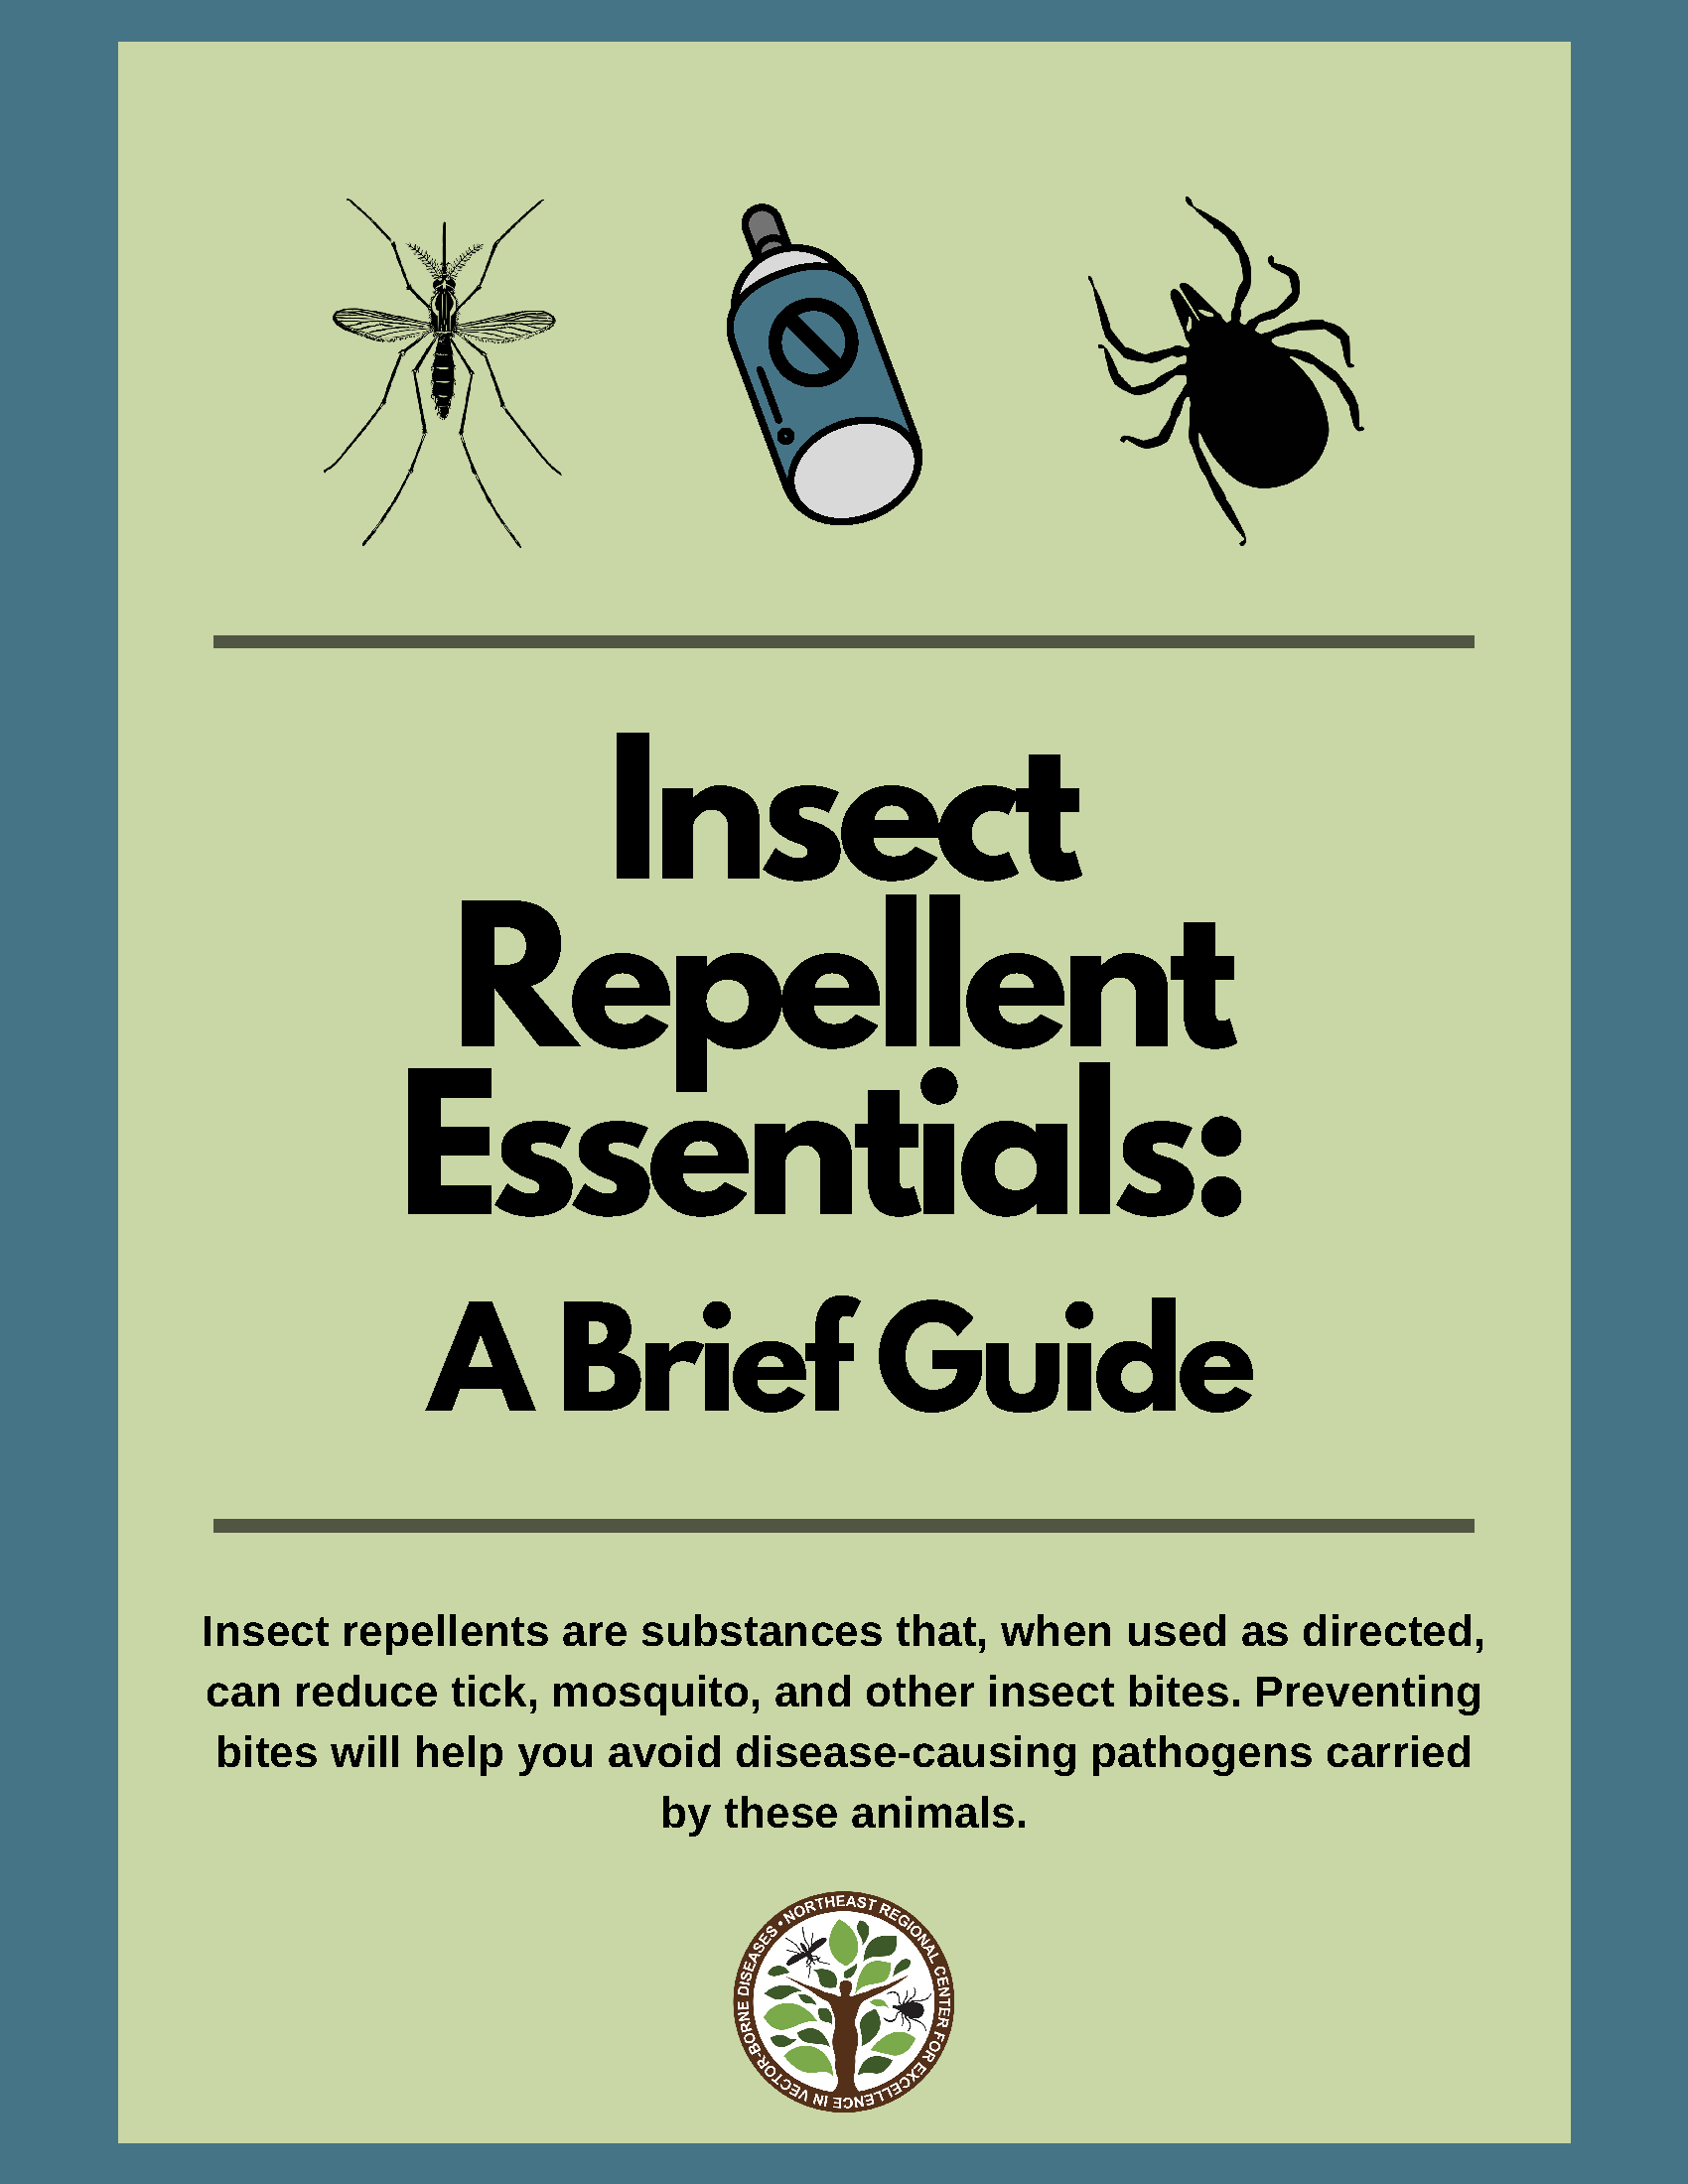 Insect repellent essentials: a brief guide booklet